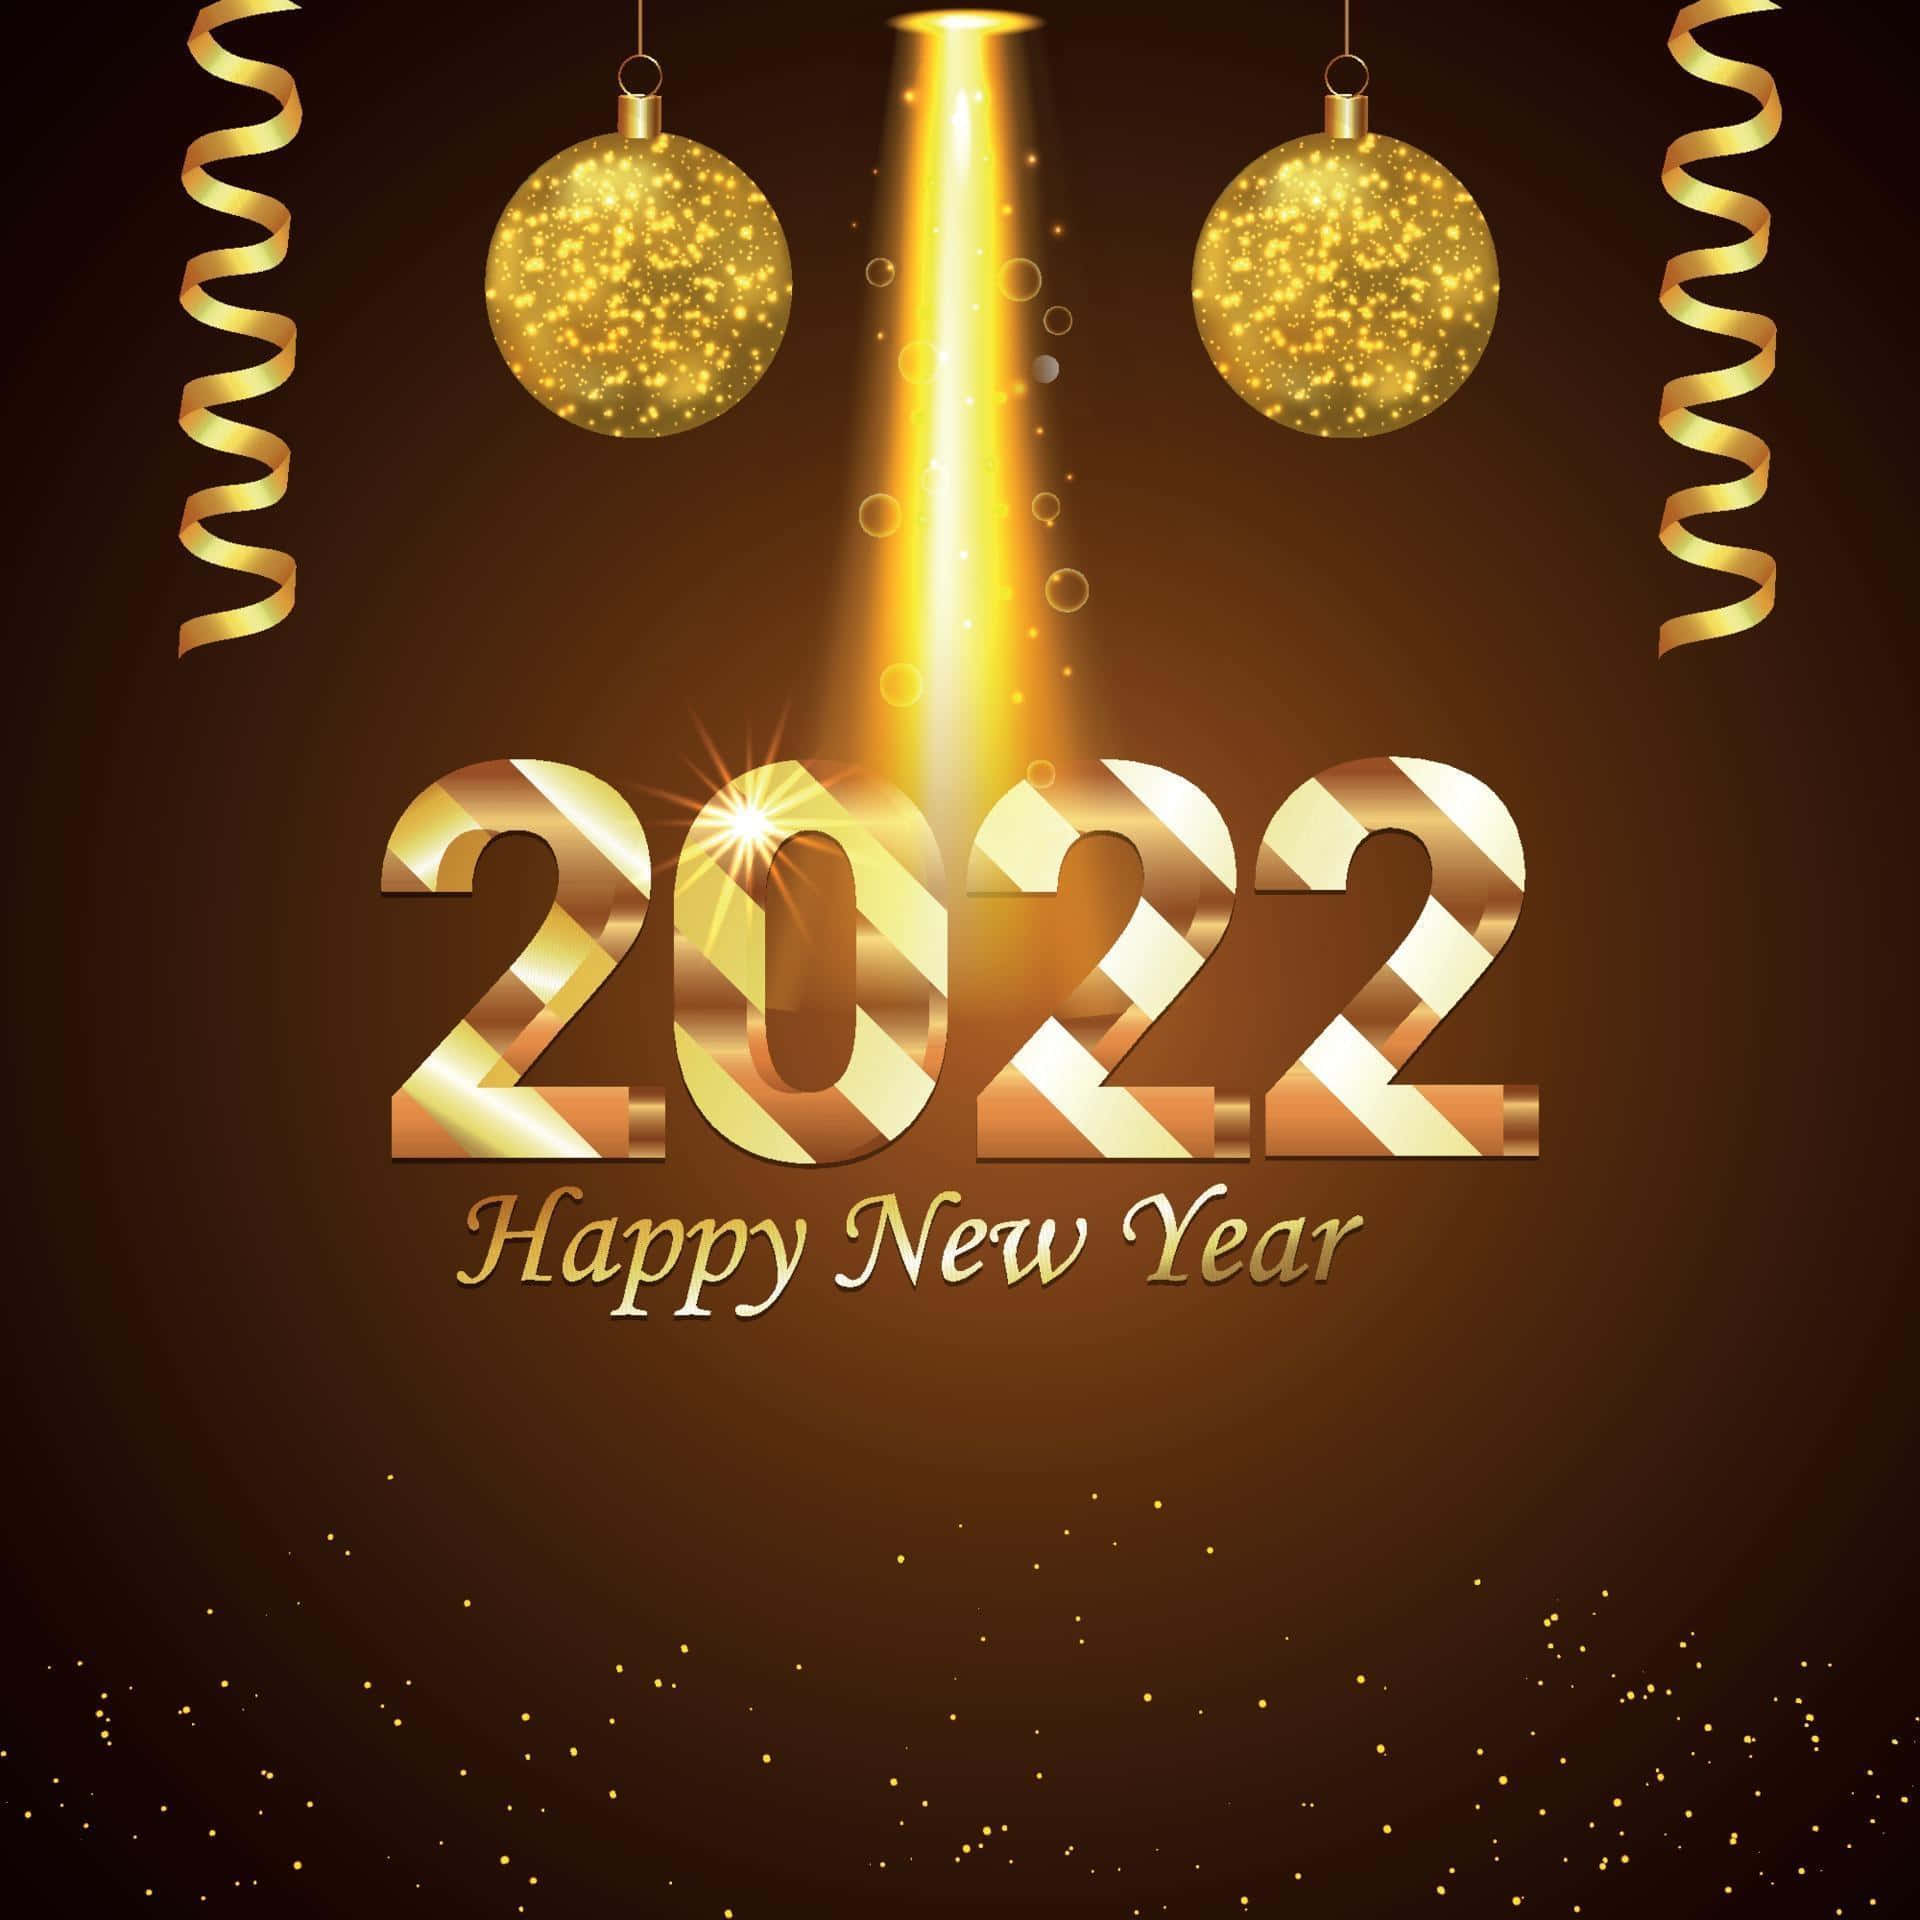 Happy New Year 2022 Background With Golden Balls And Ribbons